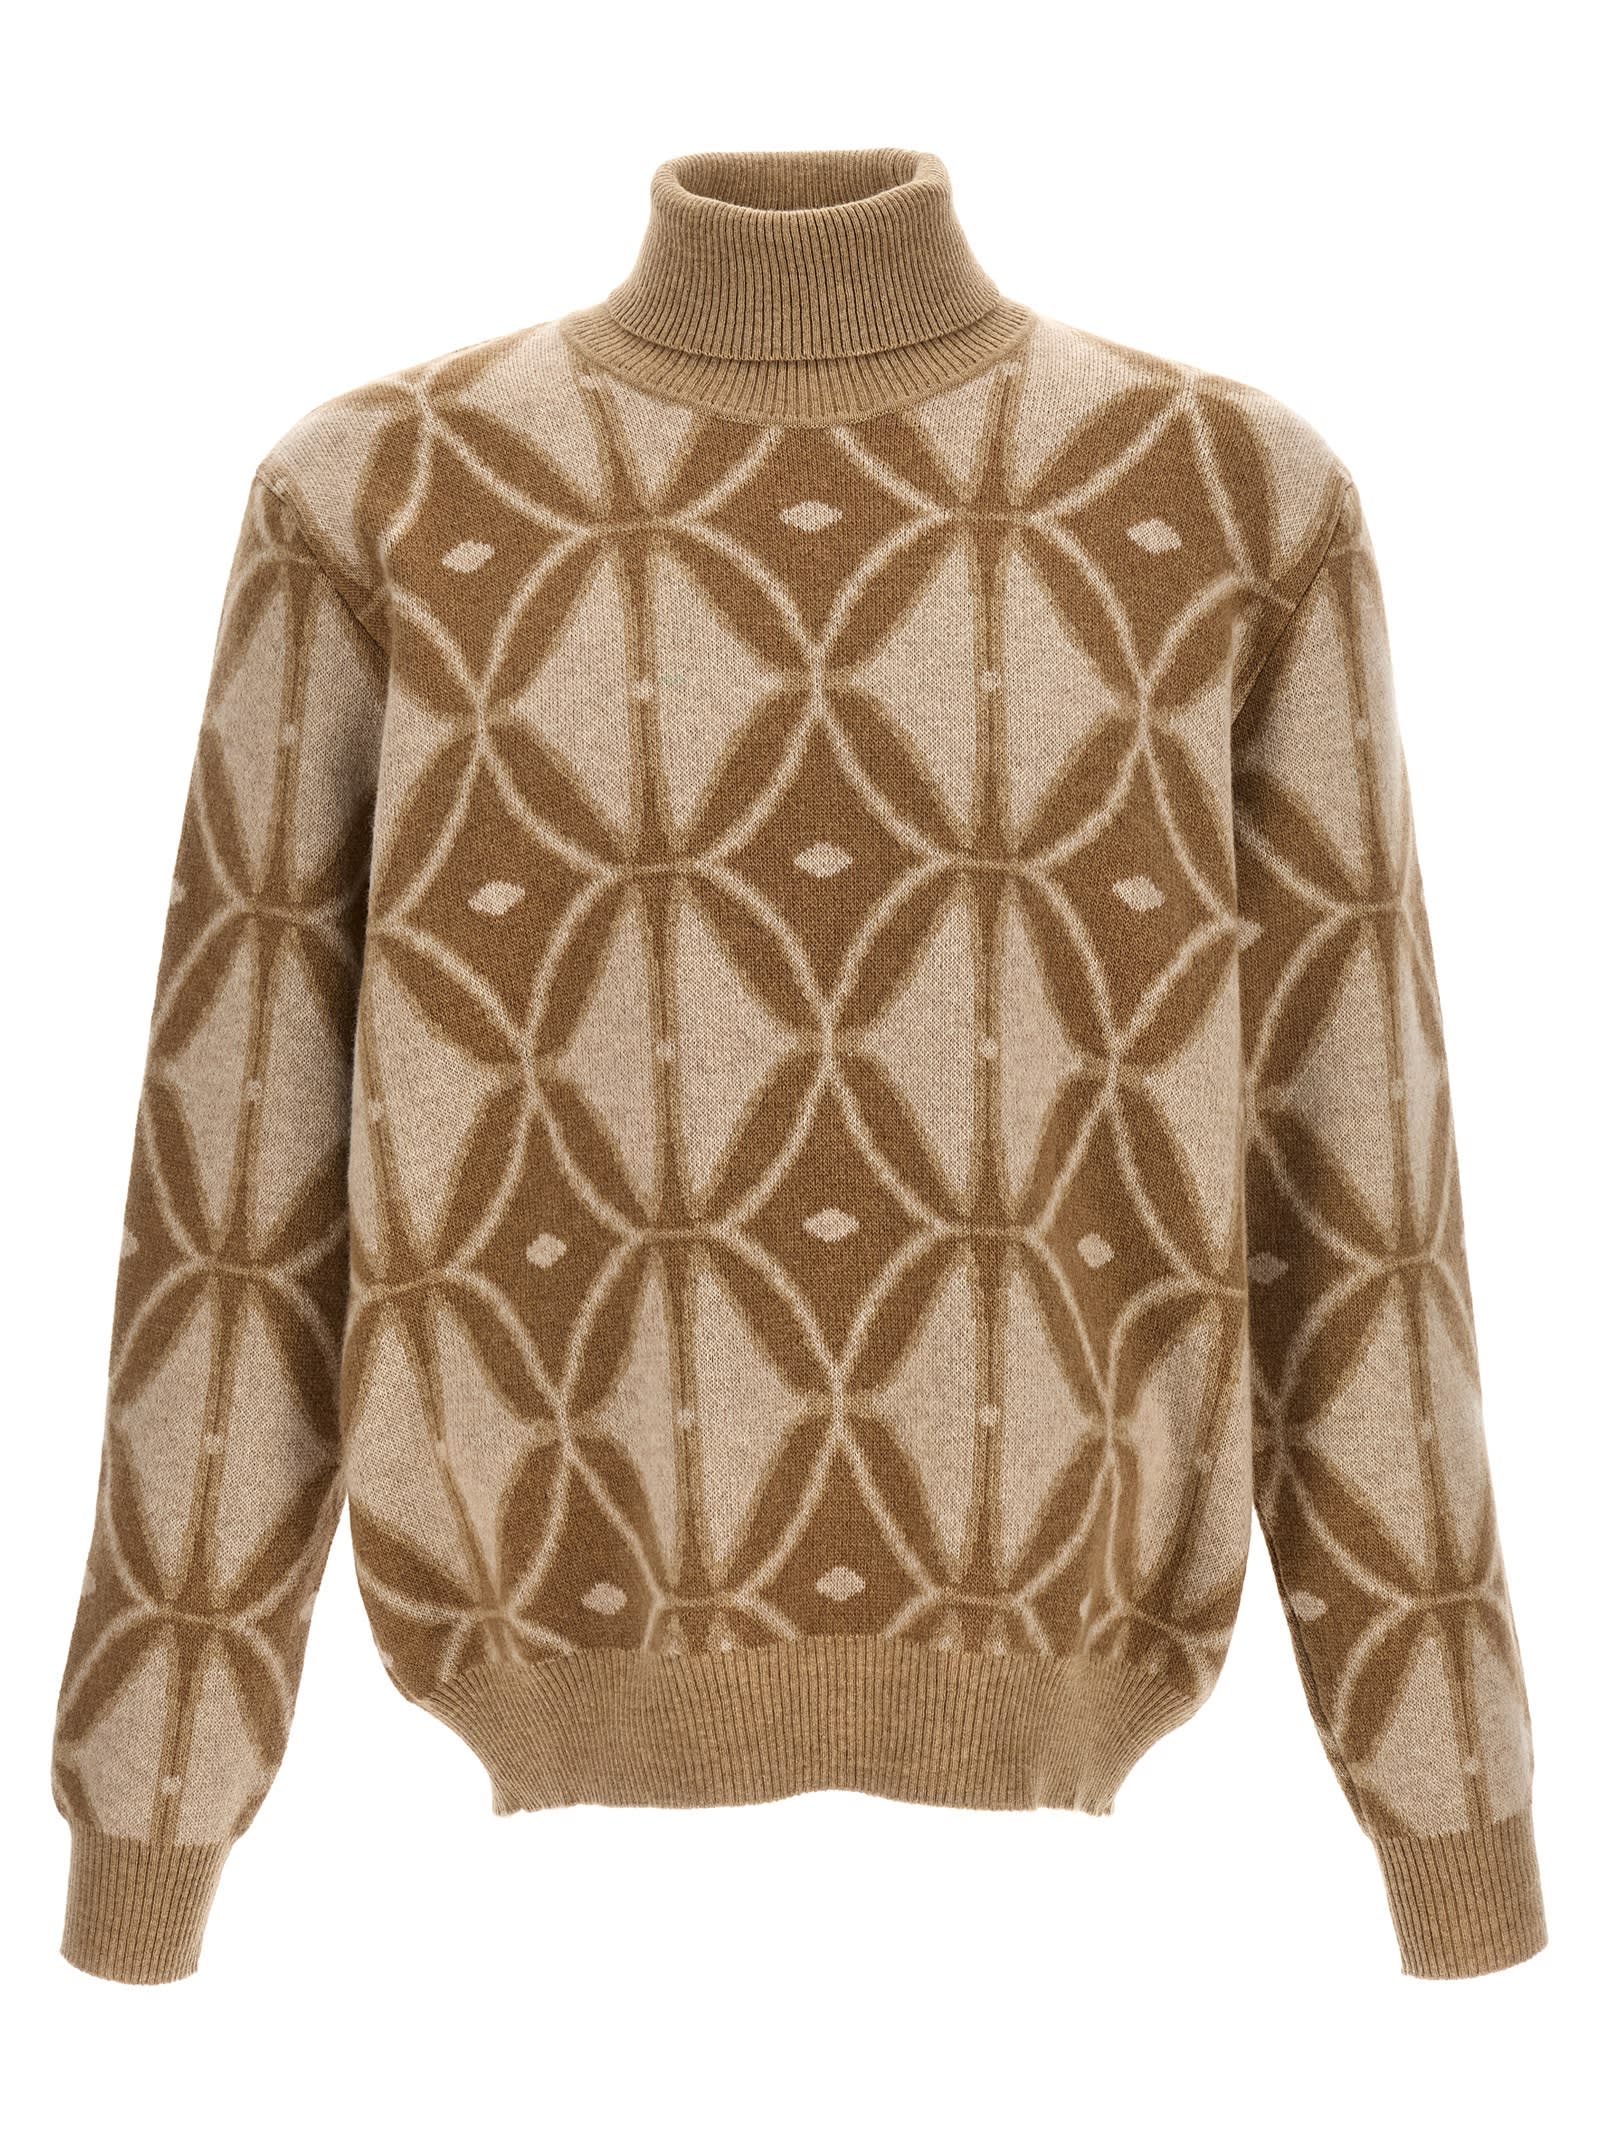 ETRO PATTERNED SWEATER